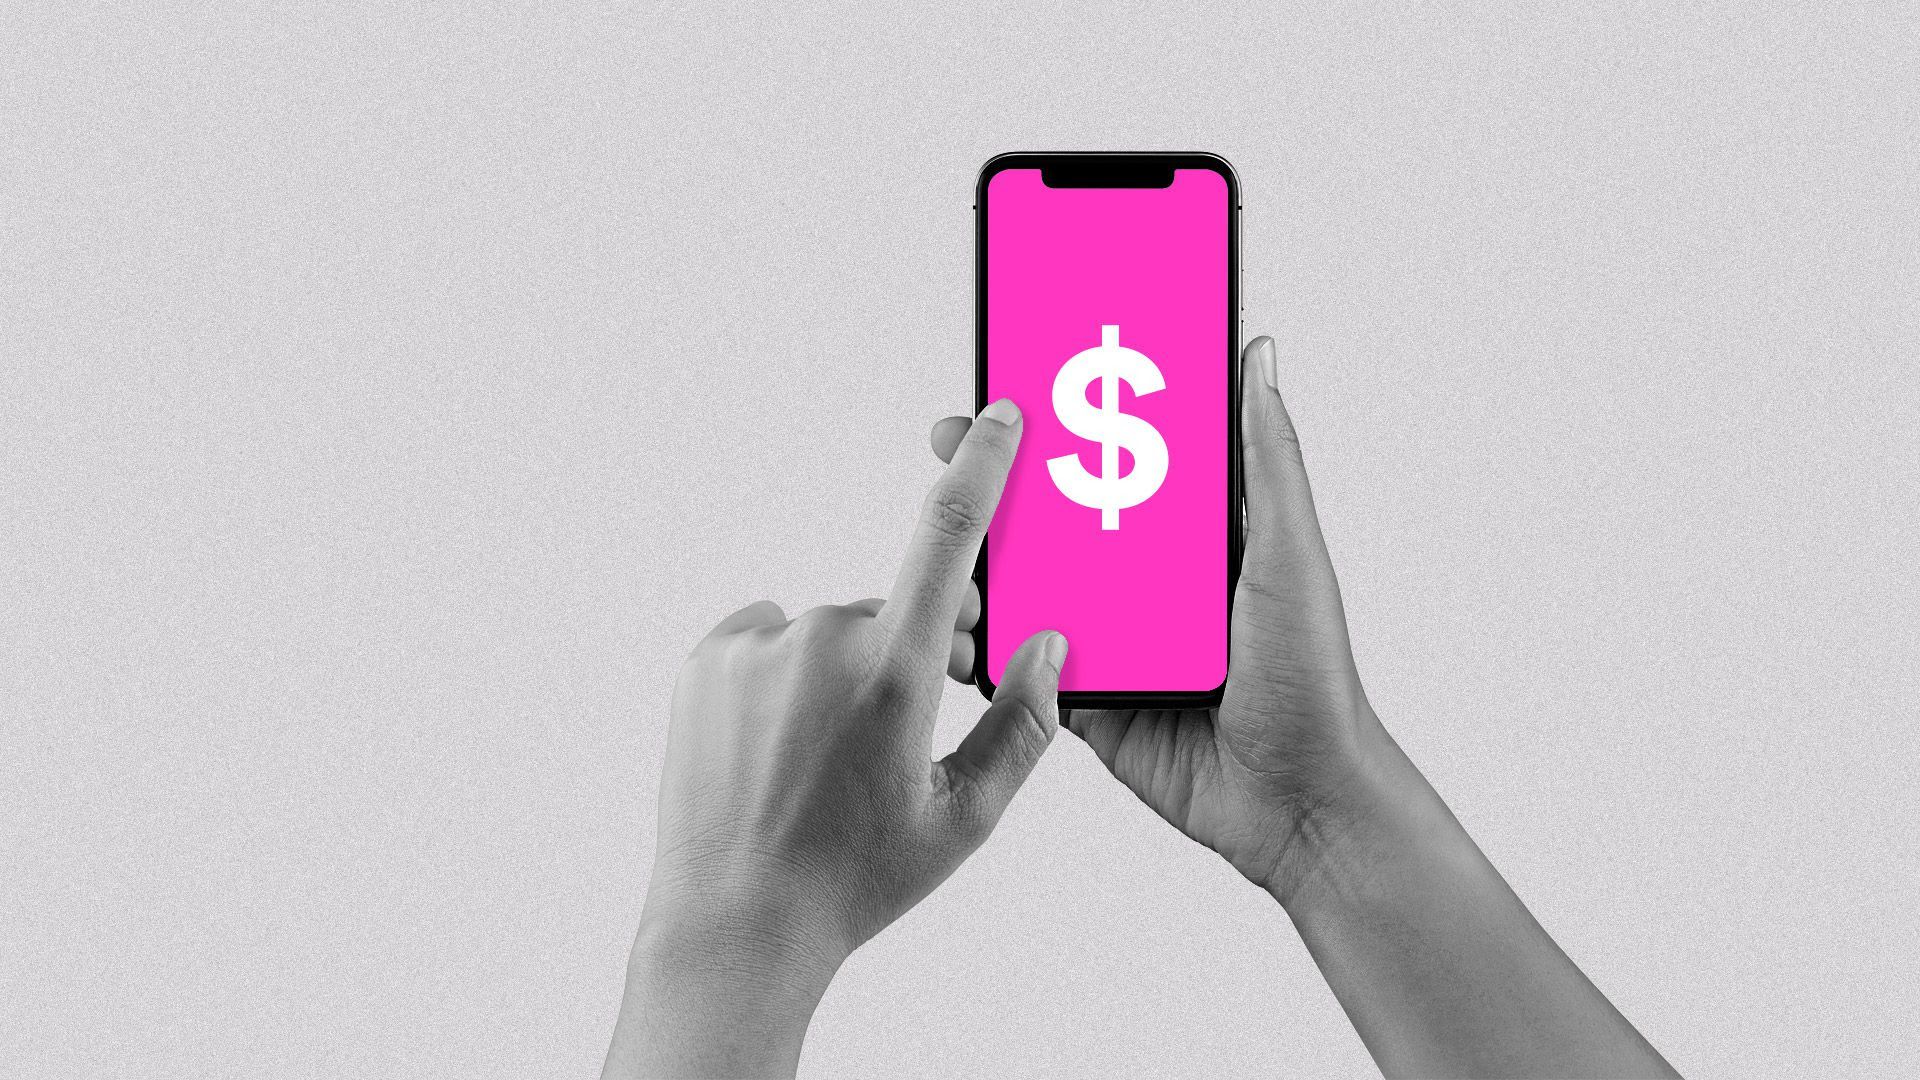 An illustration of a cell phone with a pink background and a white dollar sign